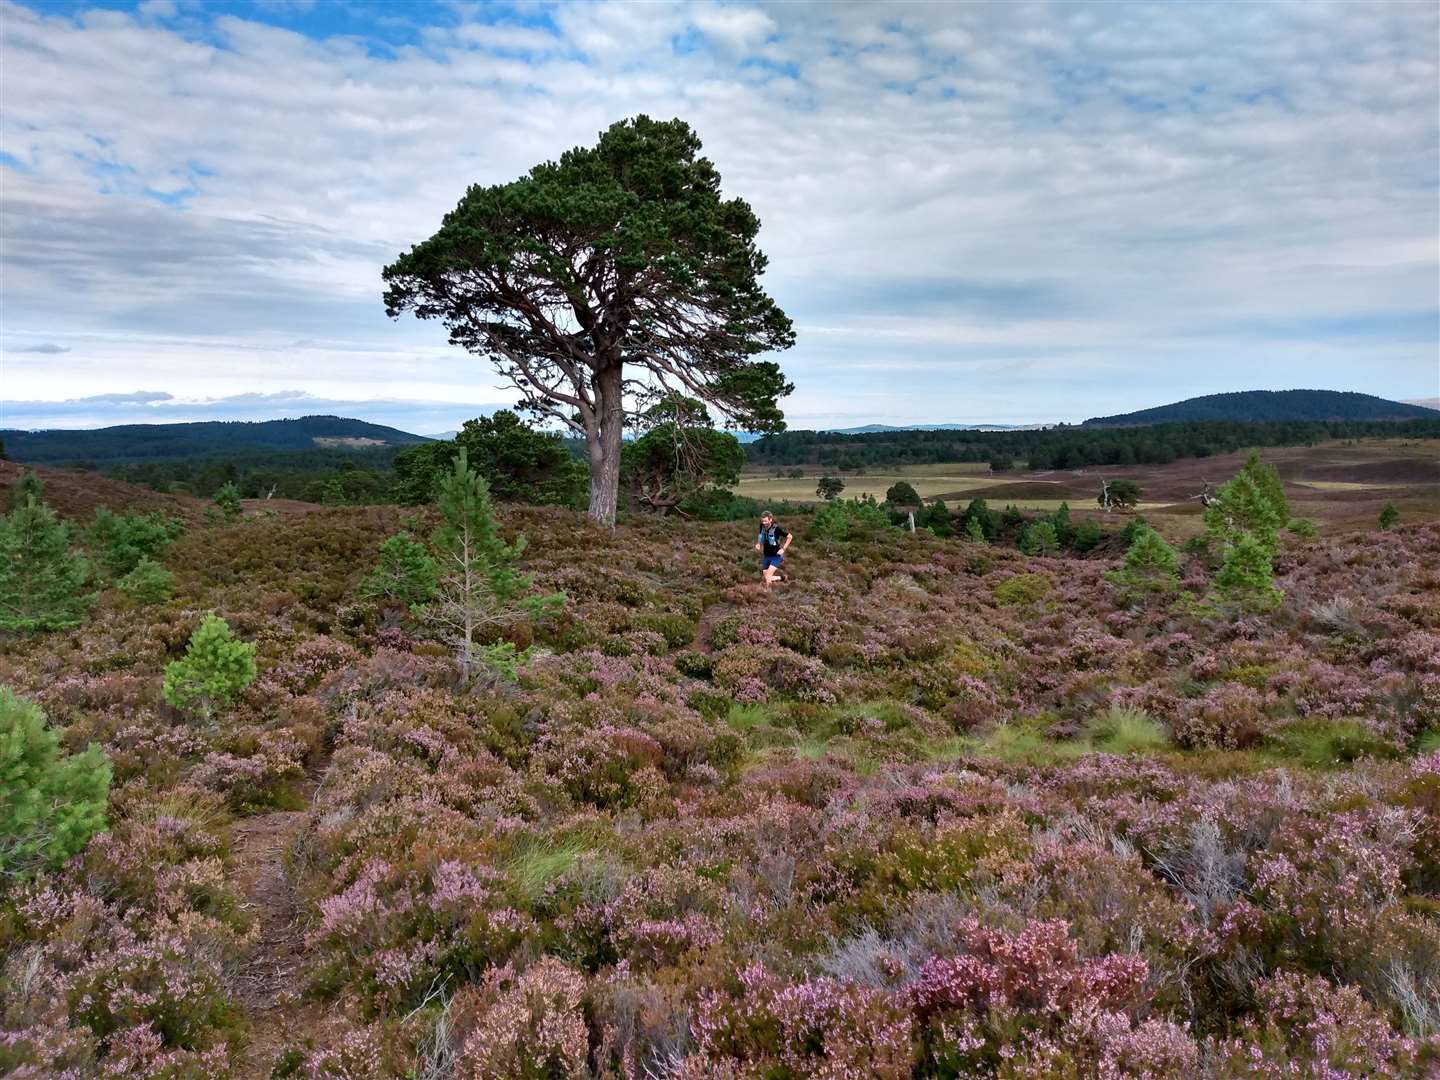 Young Scots pine grow among the heather as Dave makes his way along the narrow path.